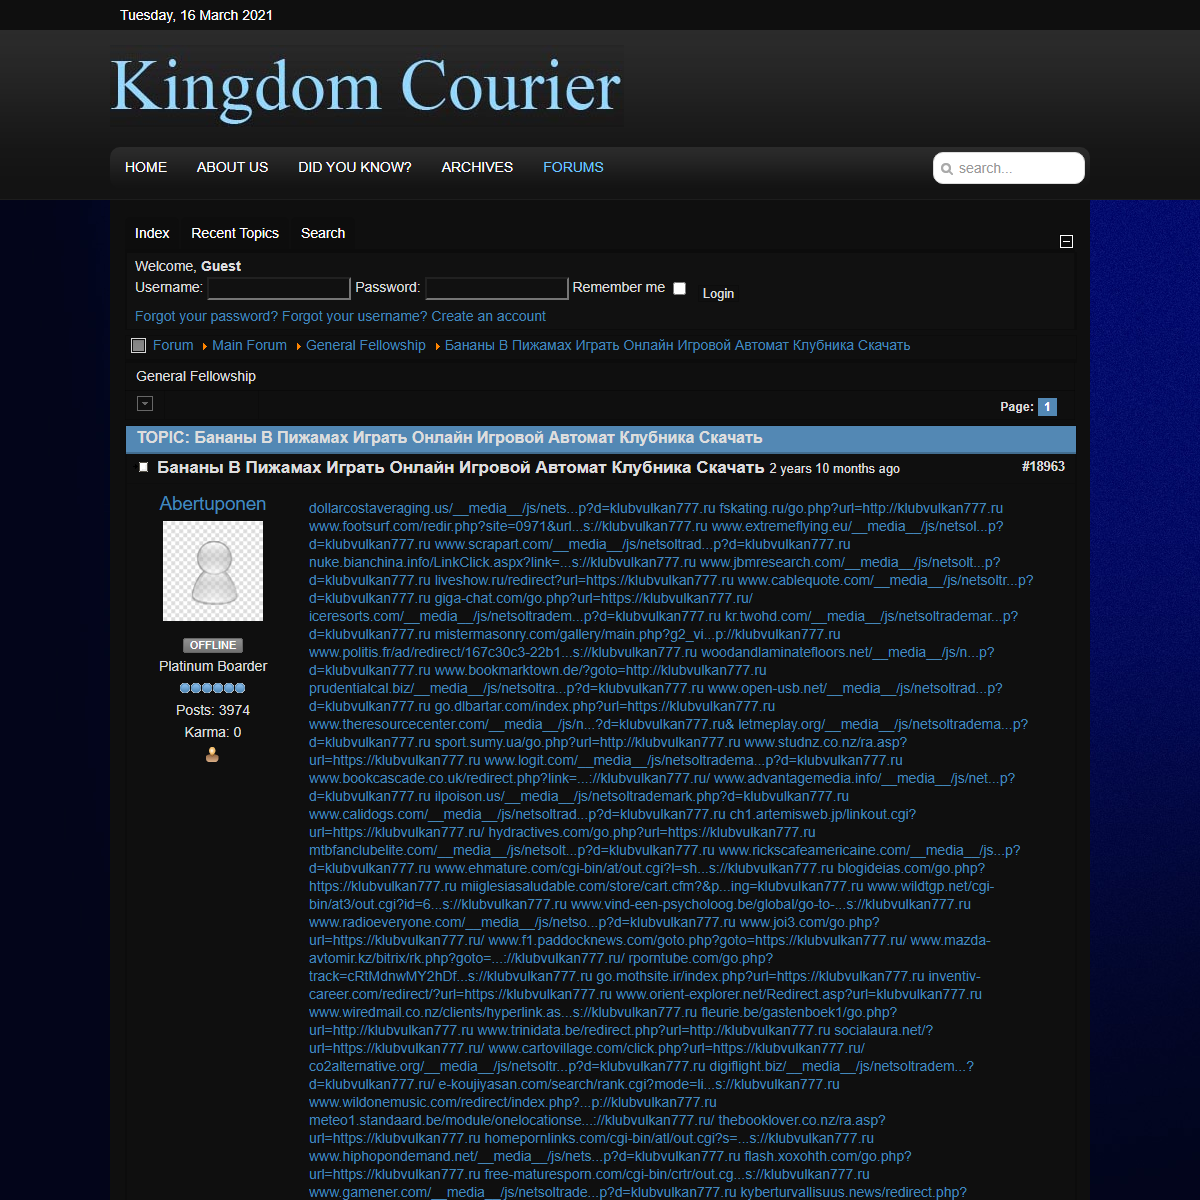 A complete backup of https://kingdomcourier.com/forum/general-fellowship/18959